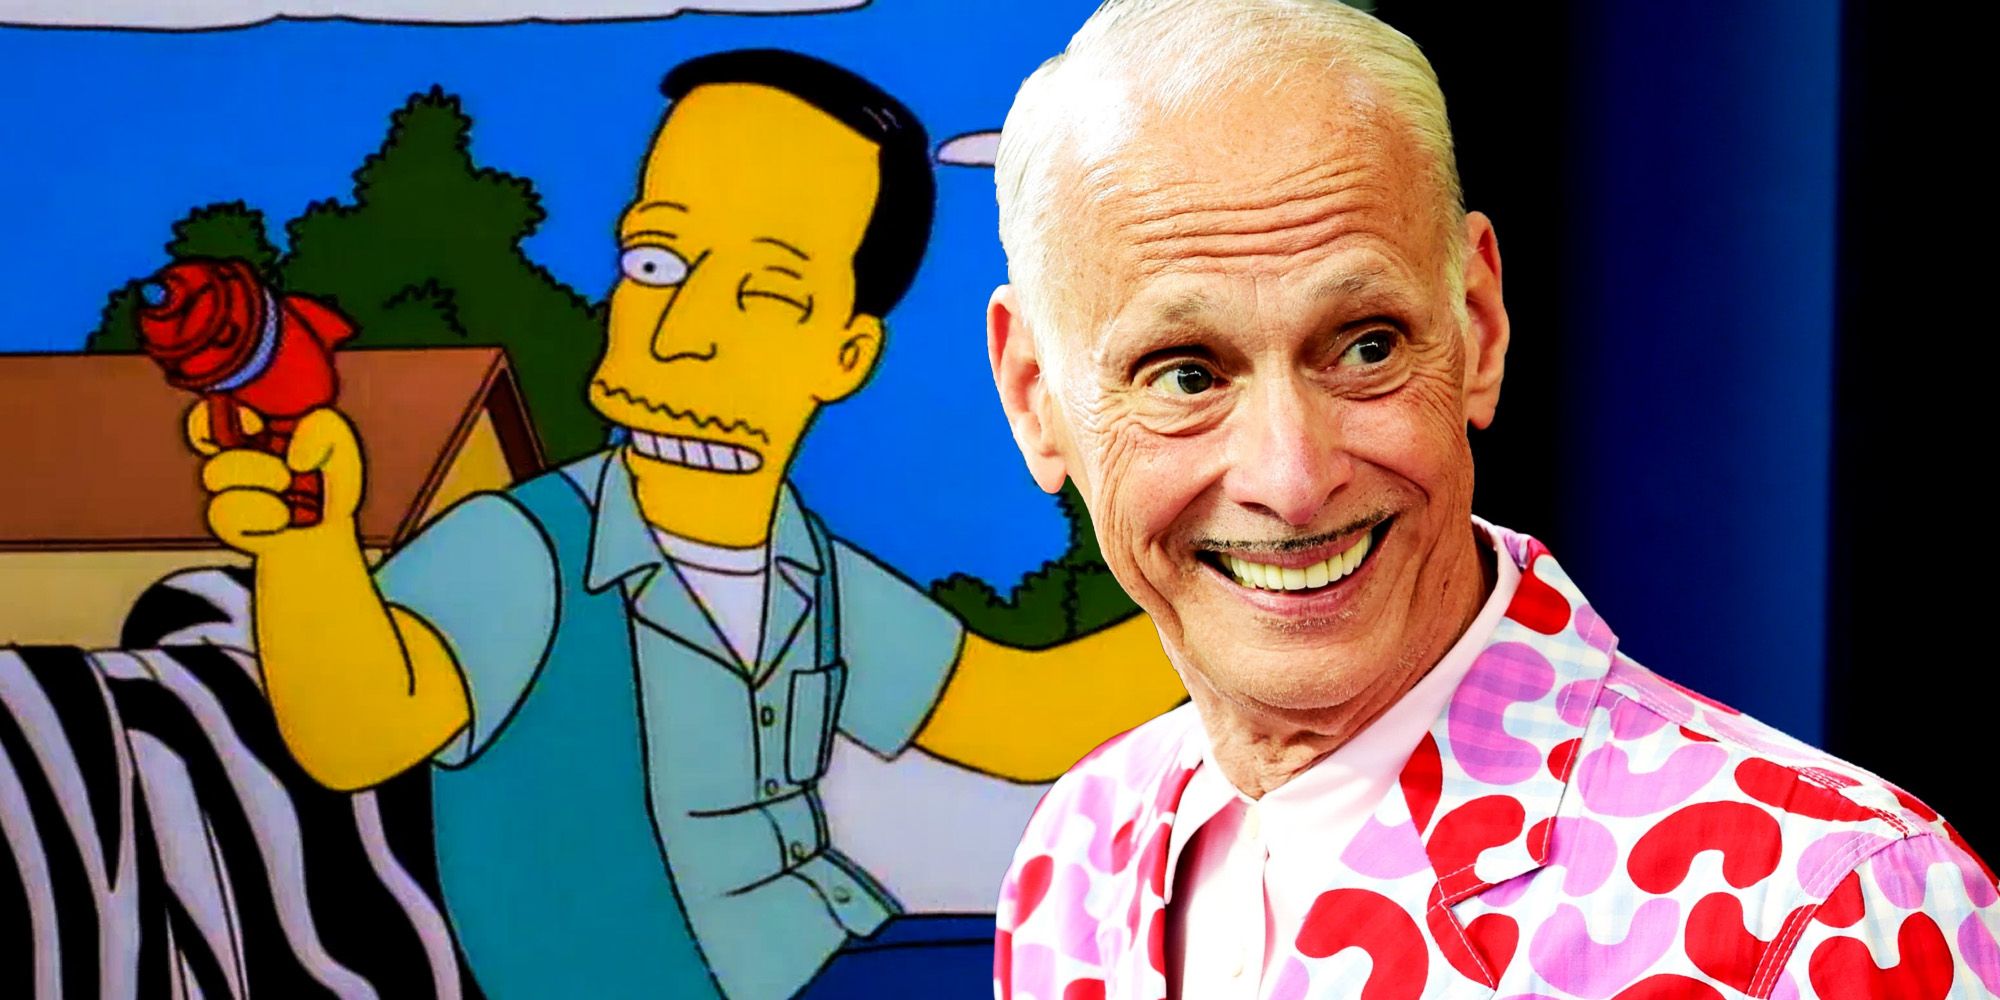 How John Waters Shaped The Simpsons’ Groundbreaking LGBTQ Episode